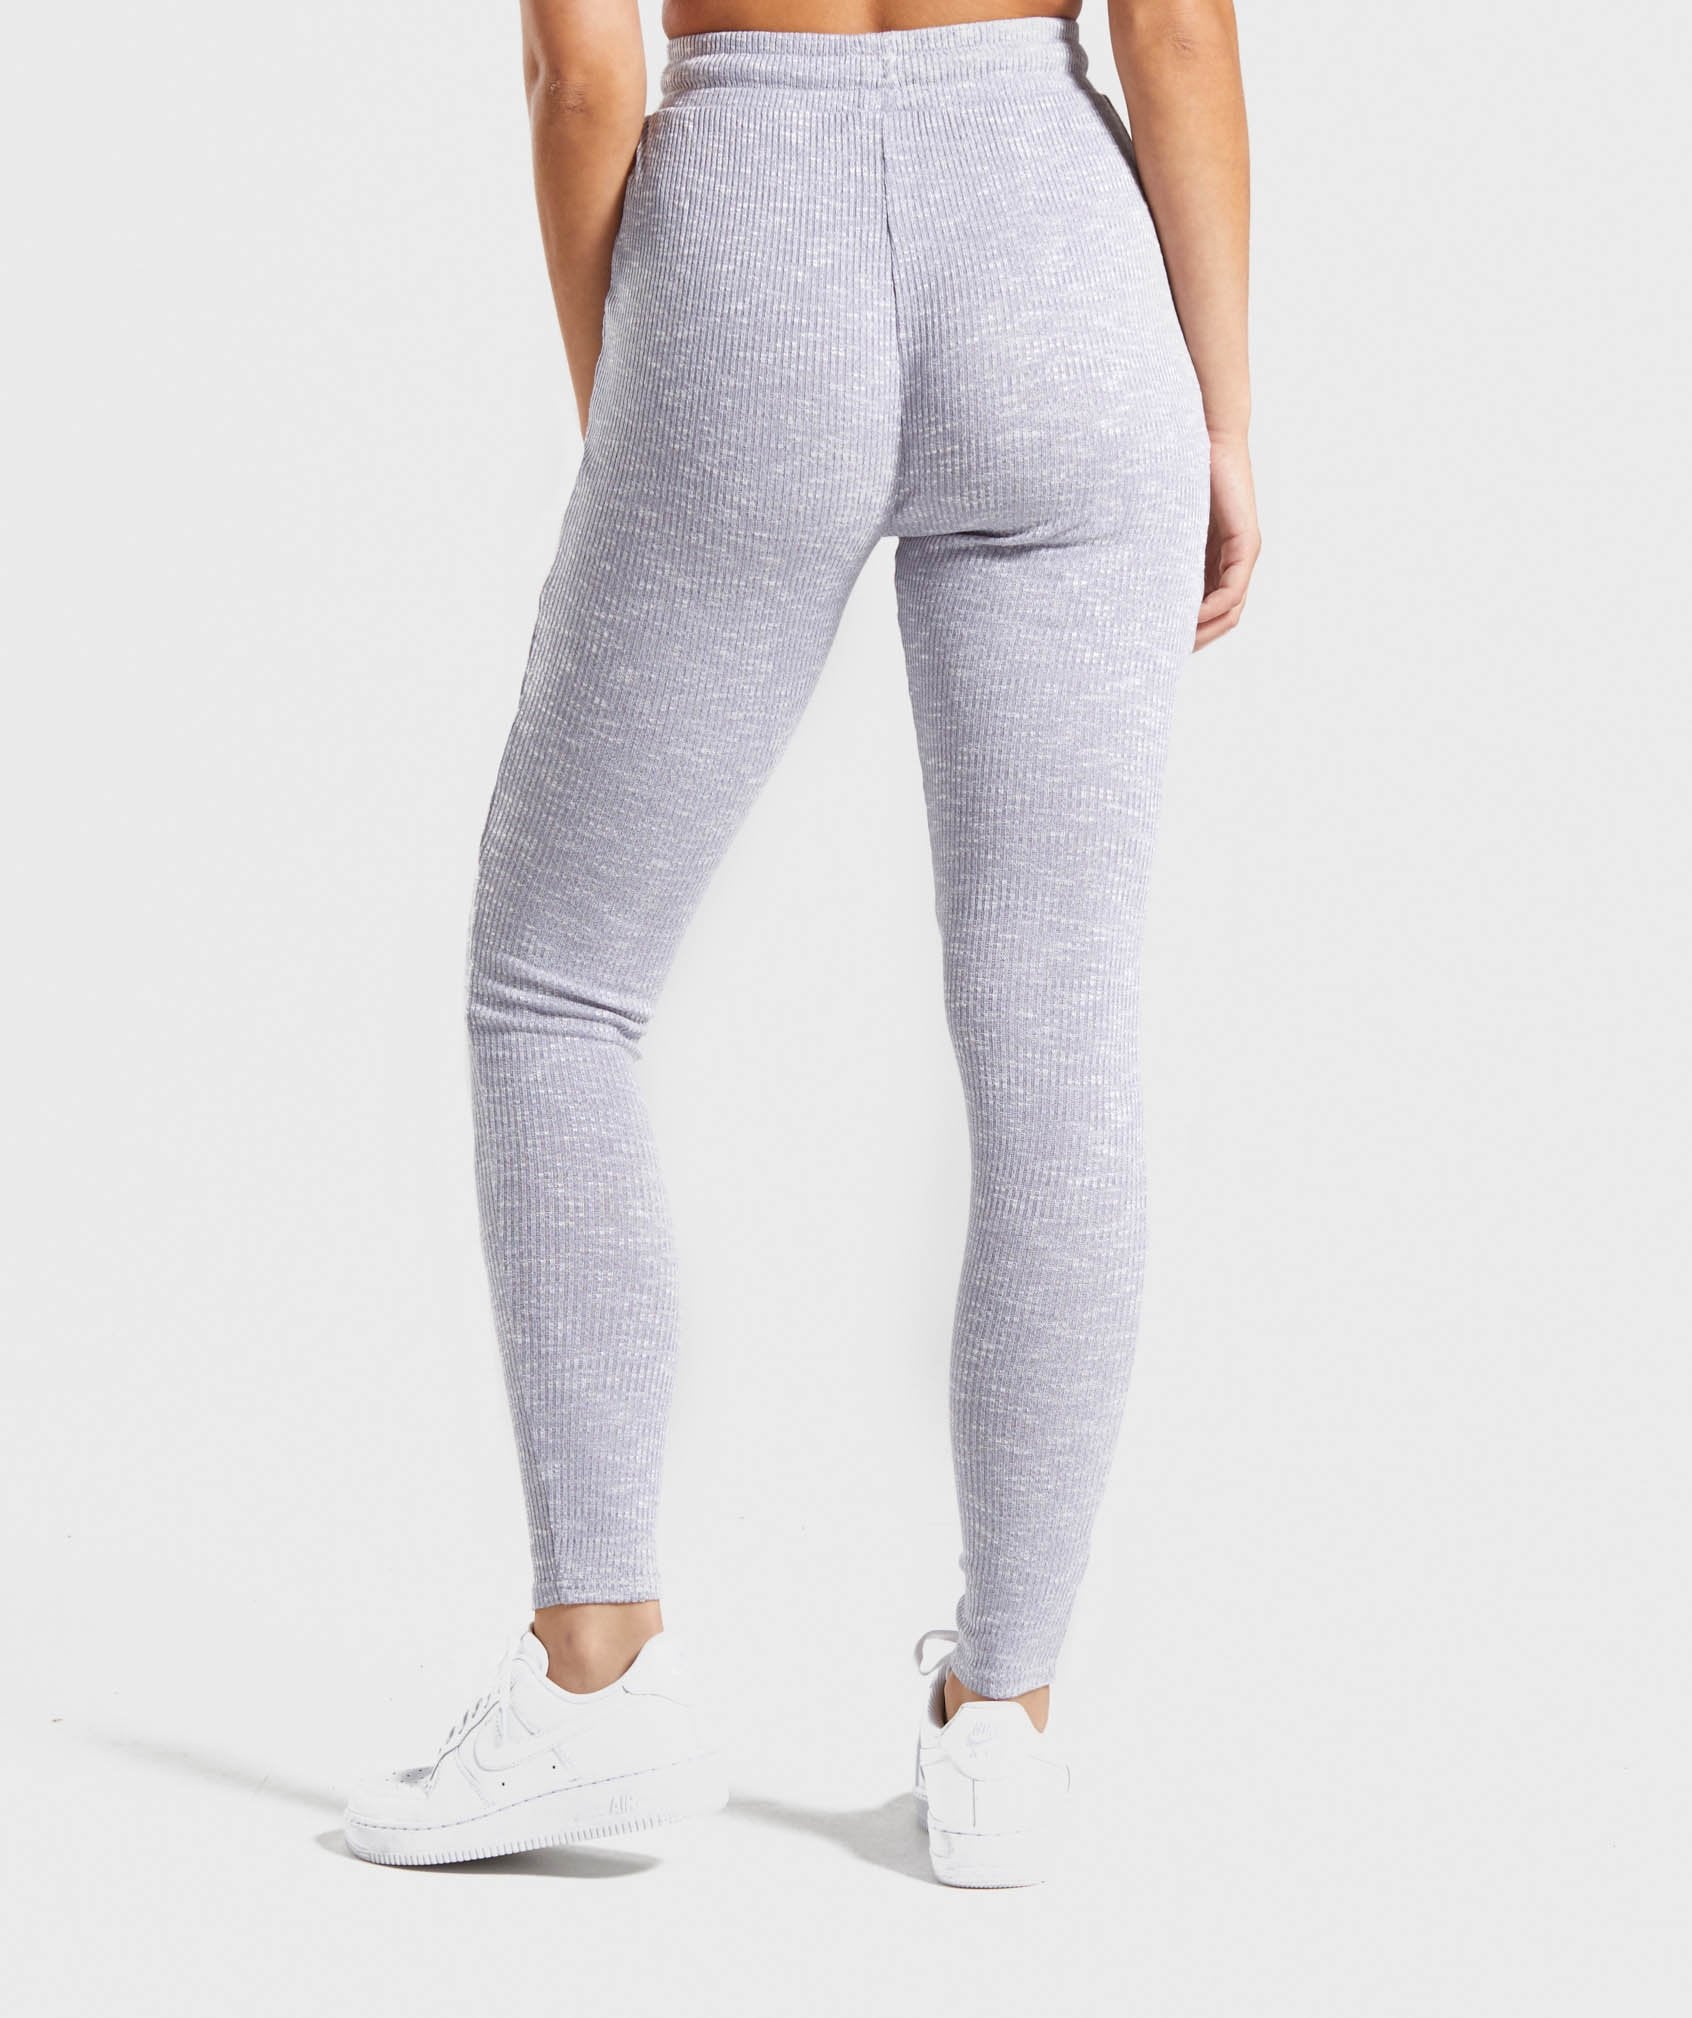 Slounge Leggings in Lilac Marl - view 2